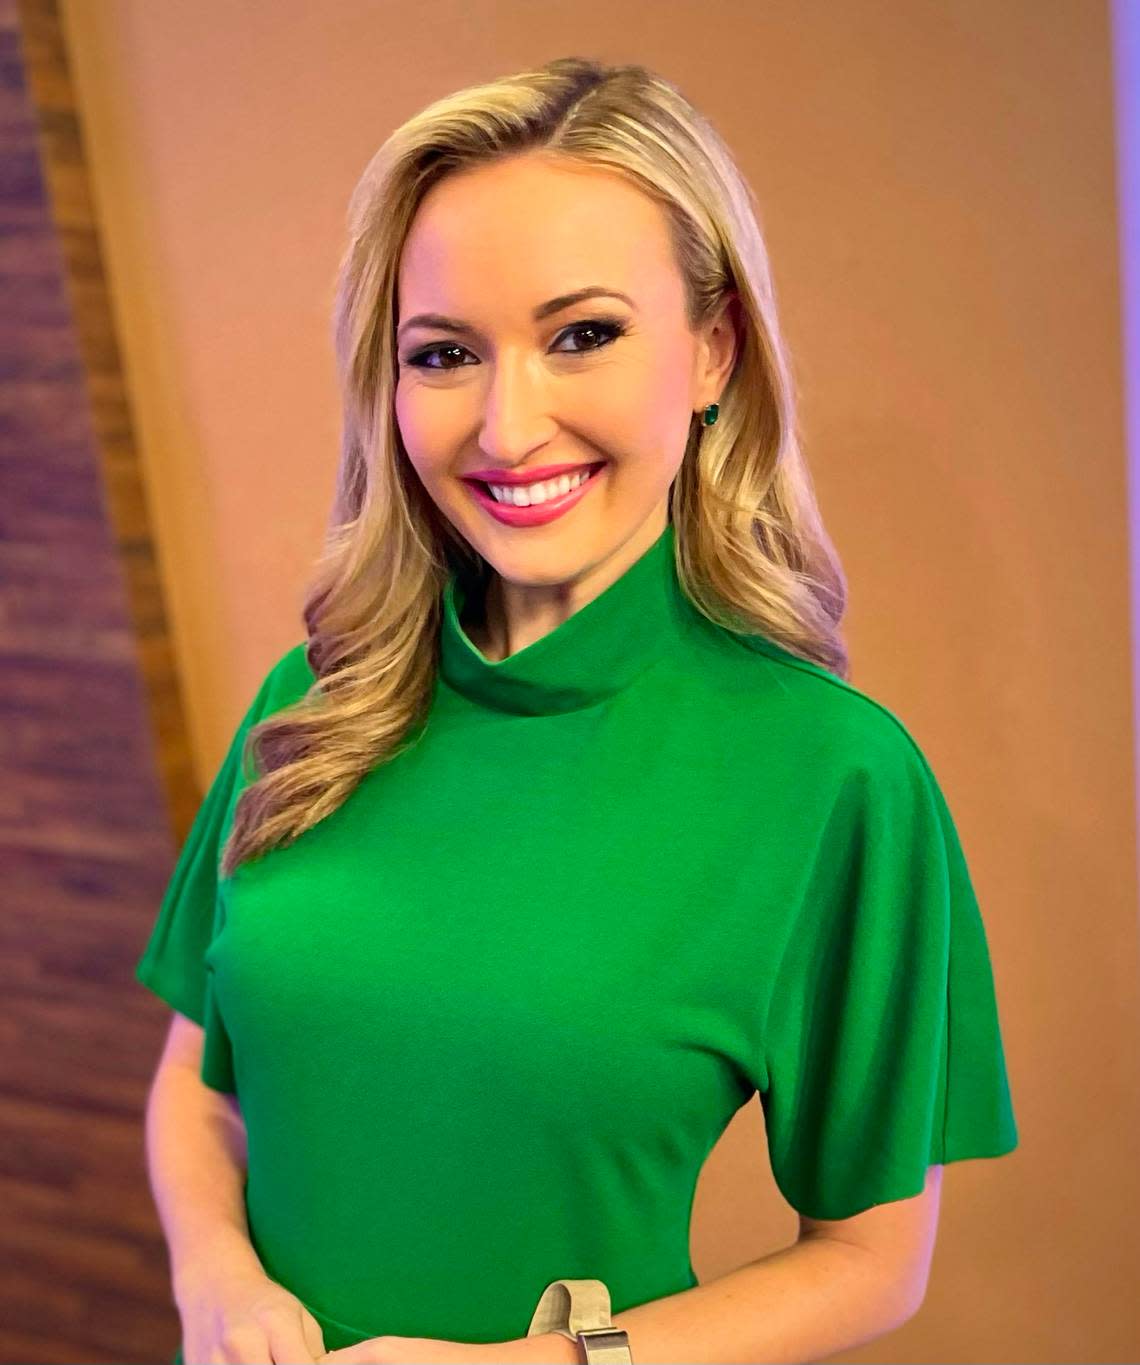 Destiny Quinn will join The CW Lexington’s morning news desk as a co-anchor with Mariah Congedo and Victor Puente.